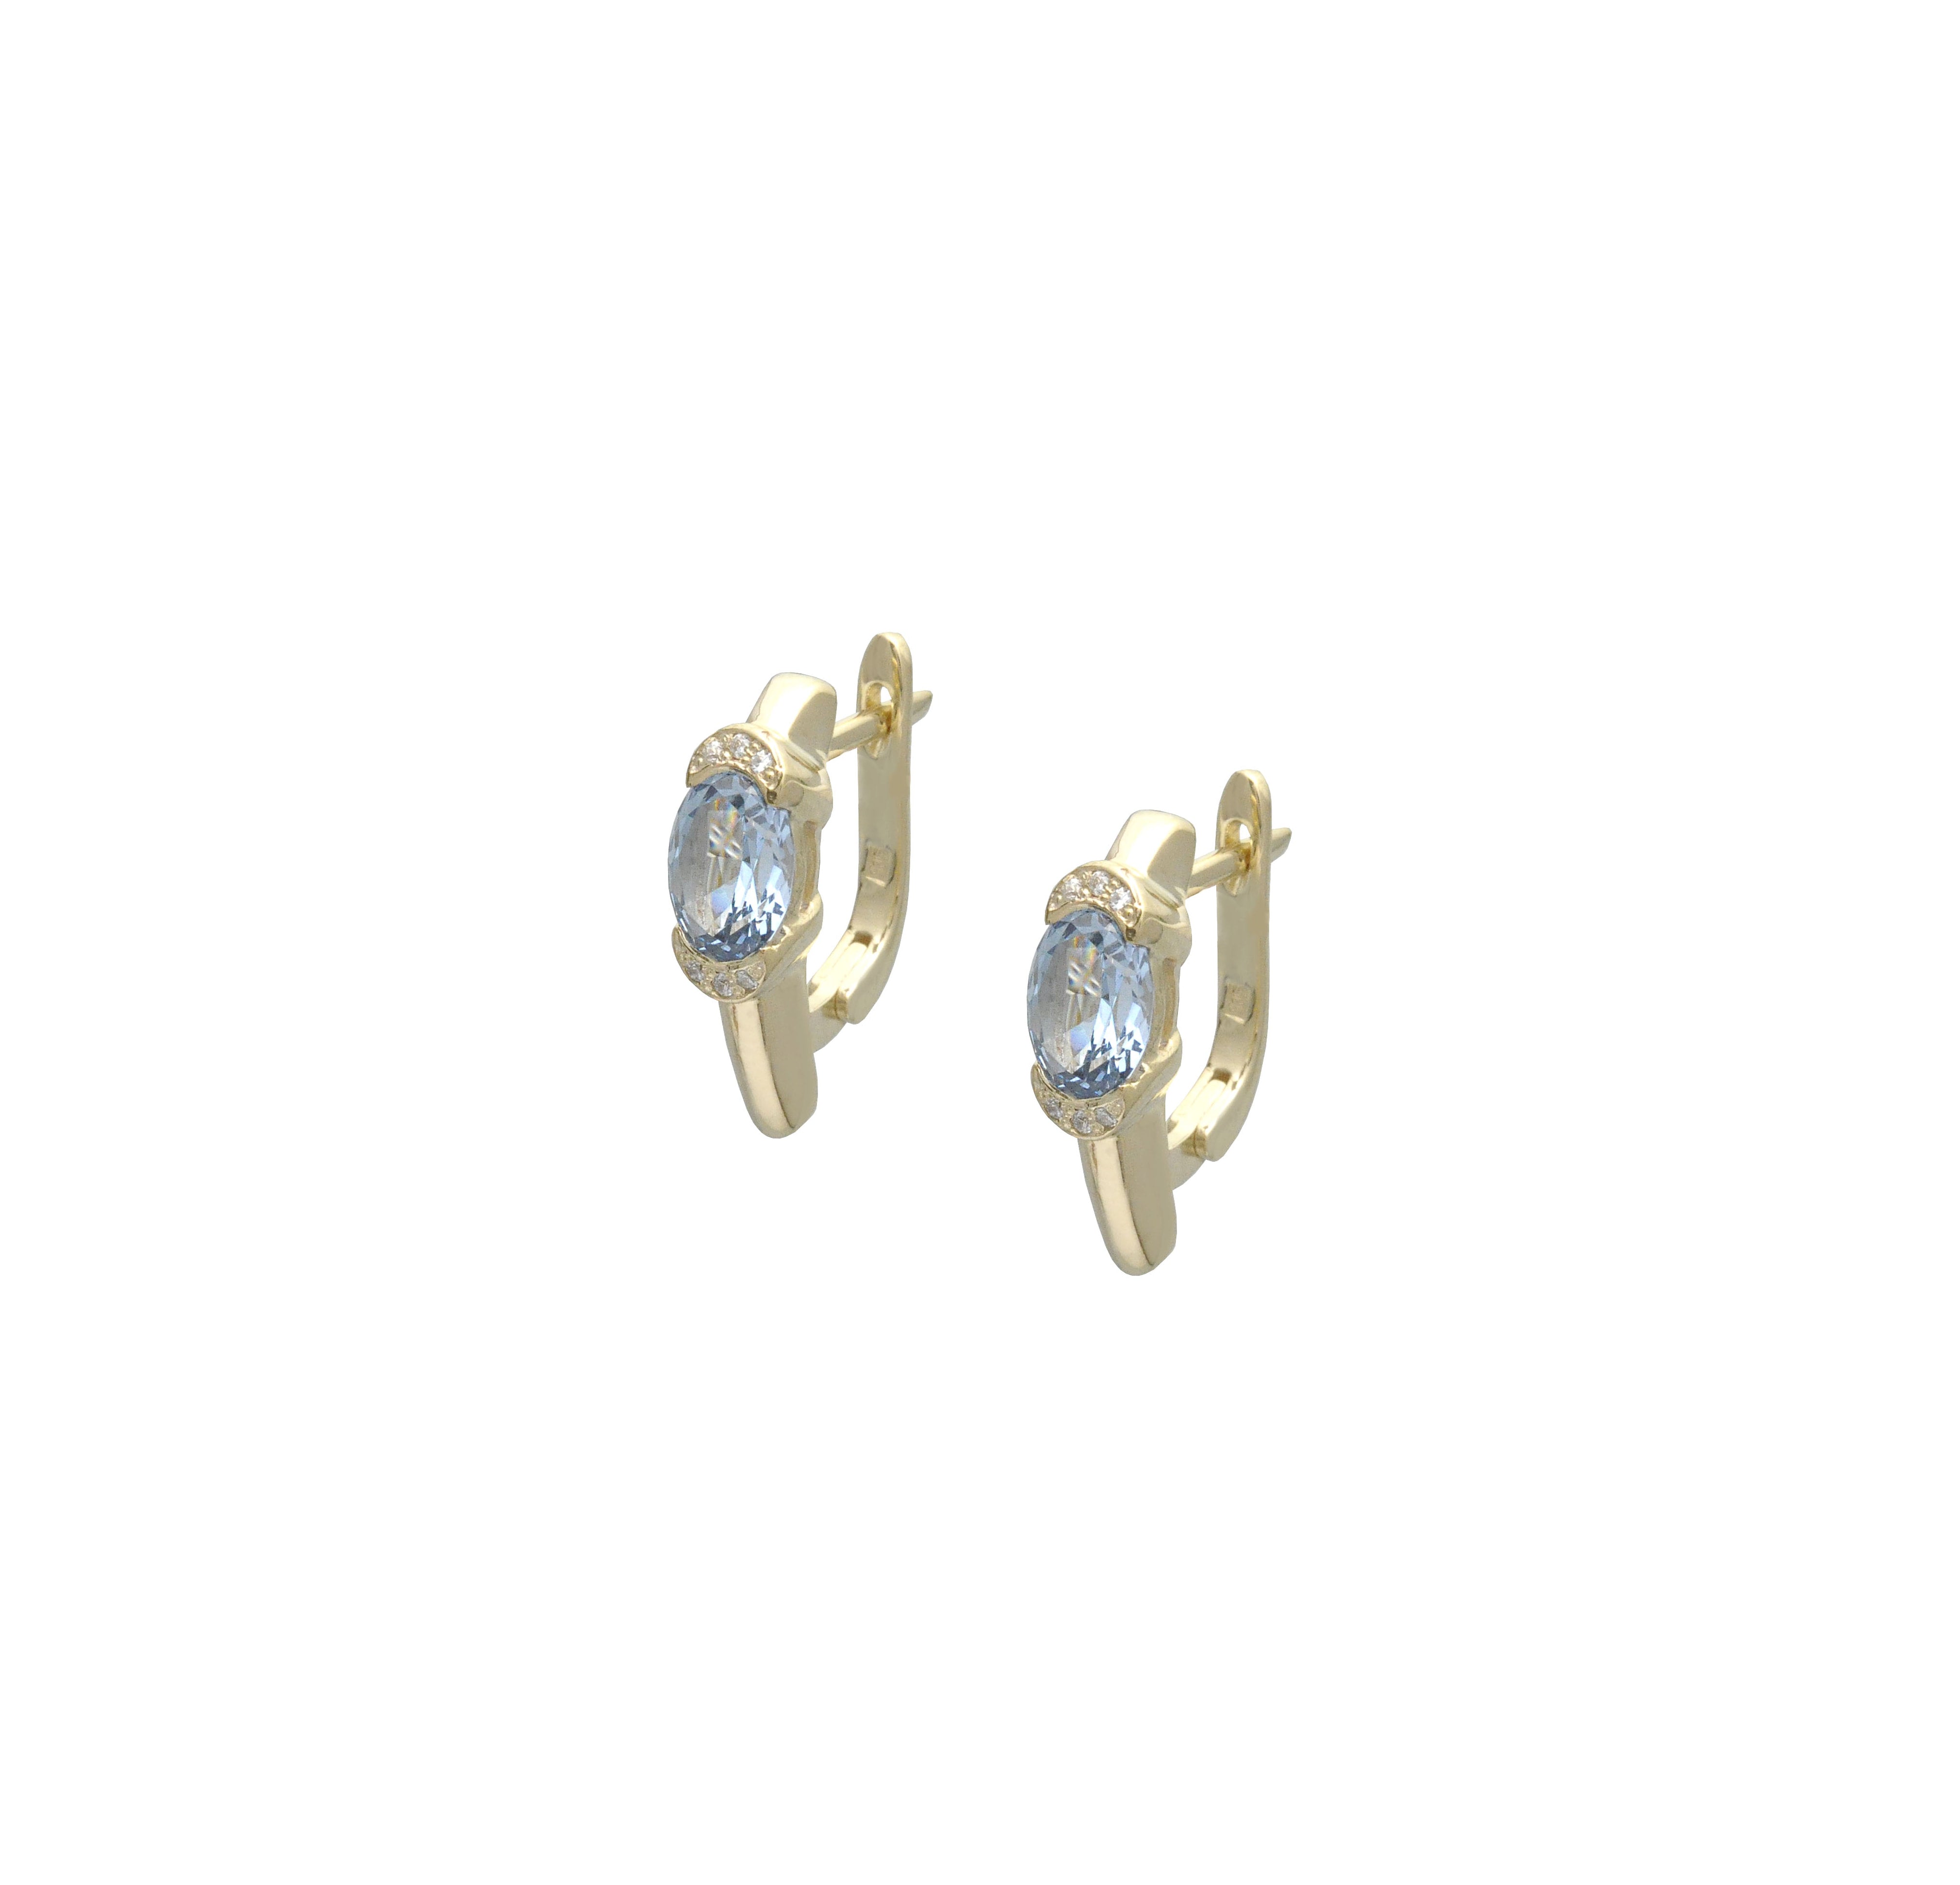 Lever back earrings in 14k yellow gold, decorated with oval topazes and diamond-cut zirconias.